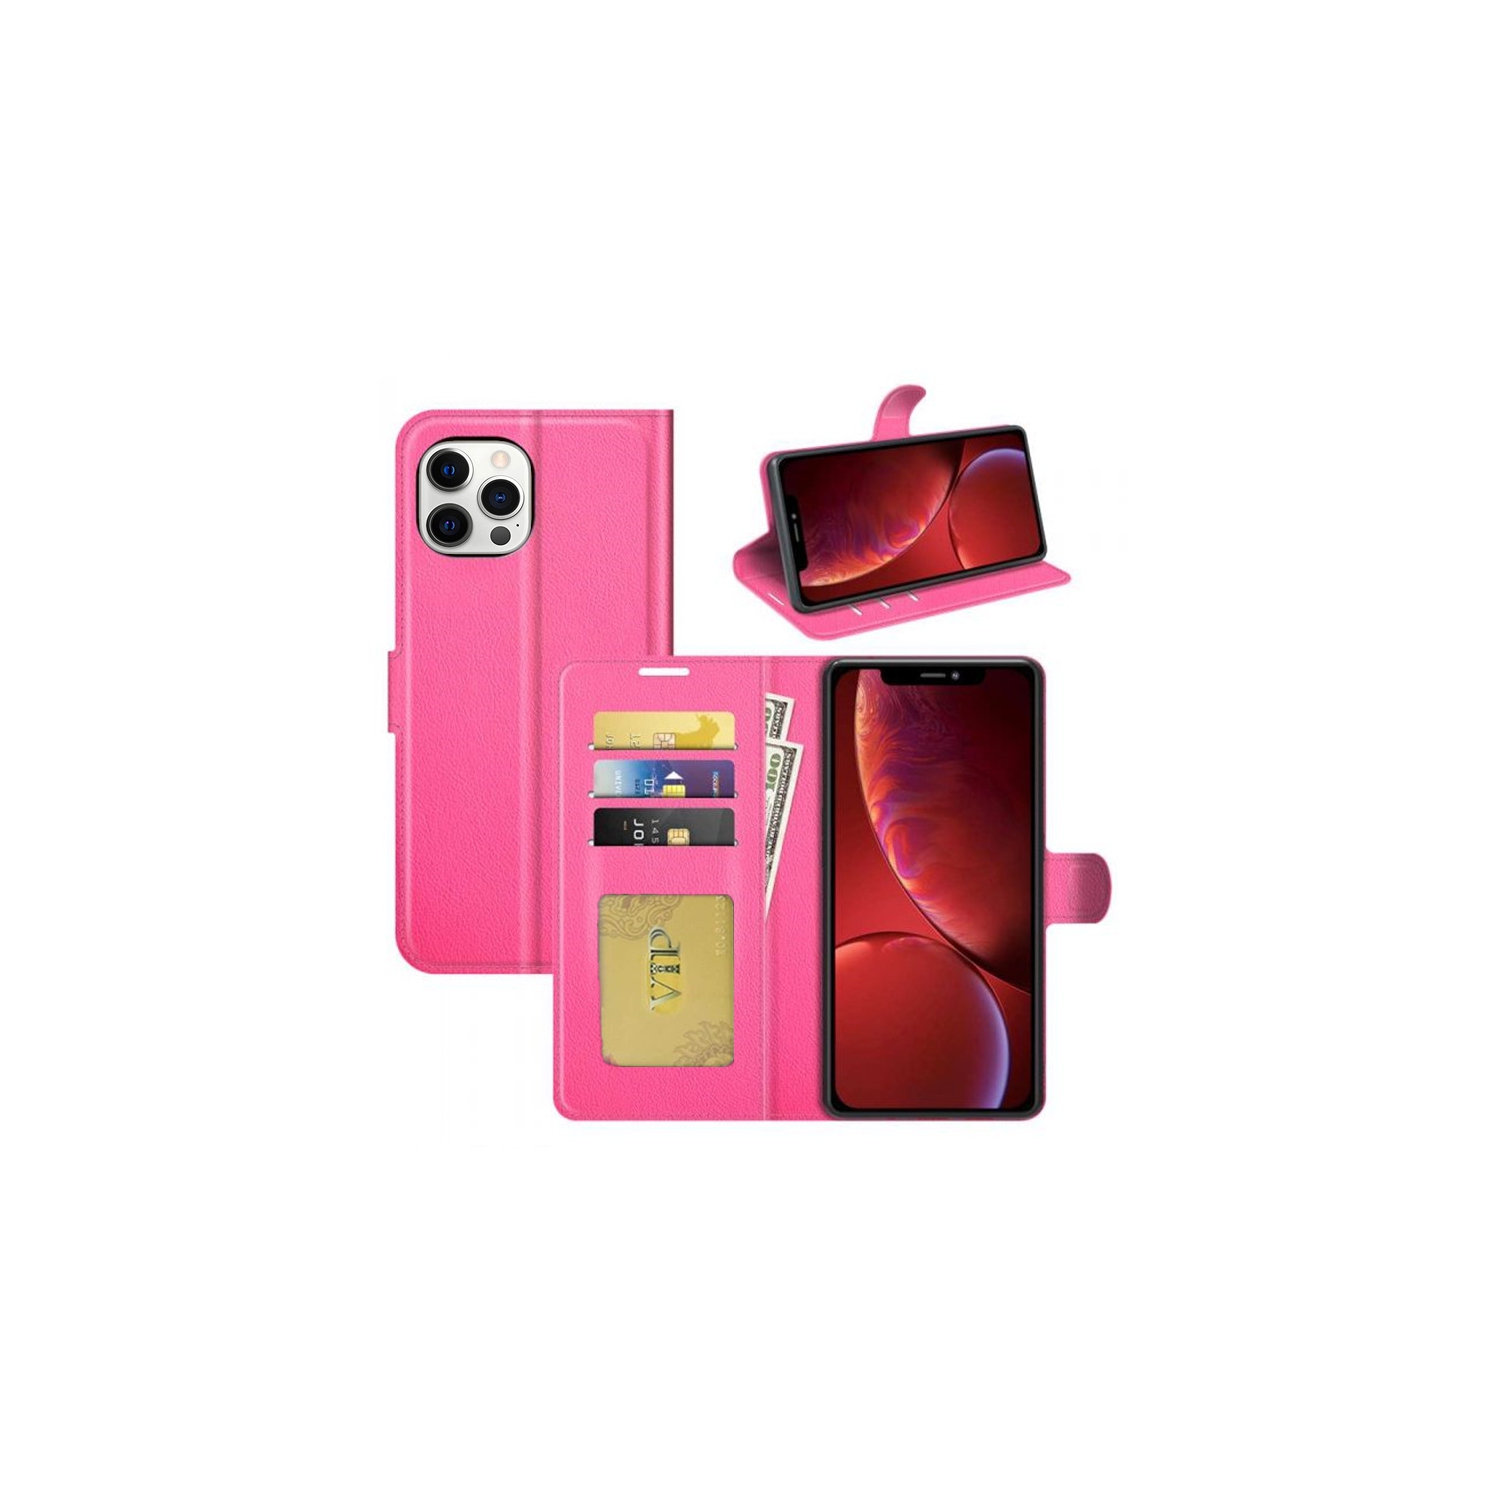 【CSmart】 Magnetic Card Slot Leather Folio Wallet Flip Case Cover for iPhone 13 Pro Max (6.7"), Hot Pink